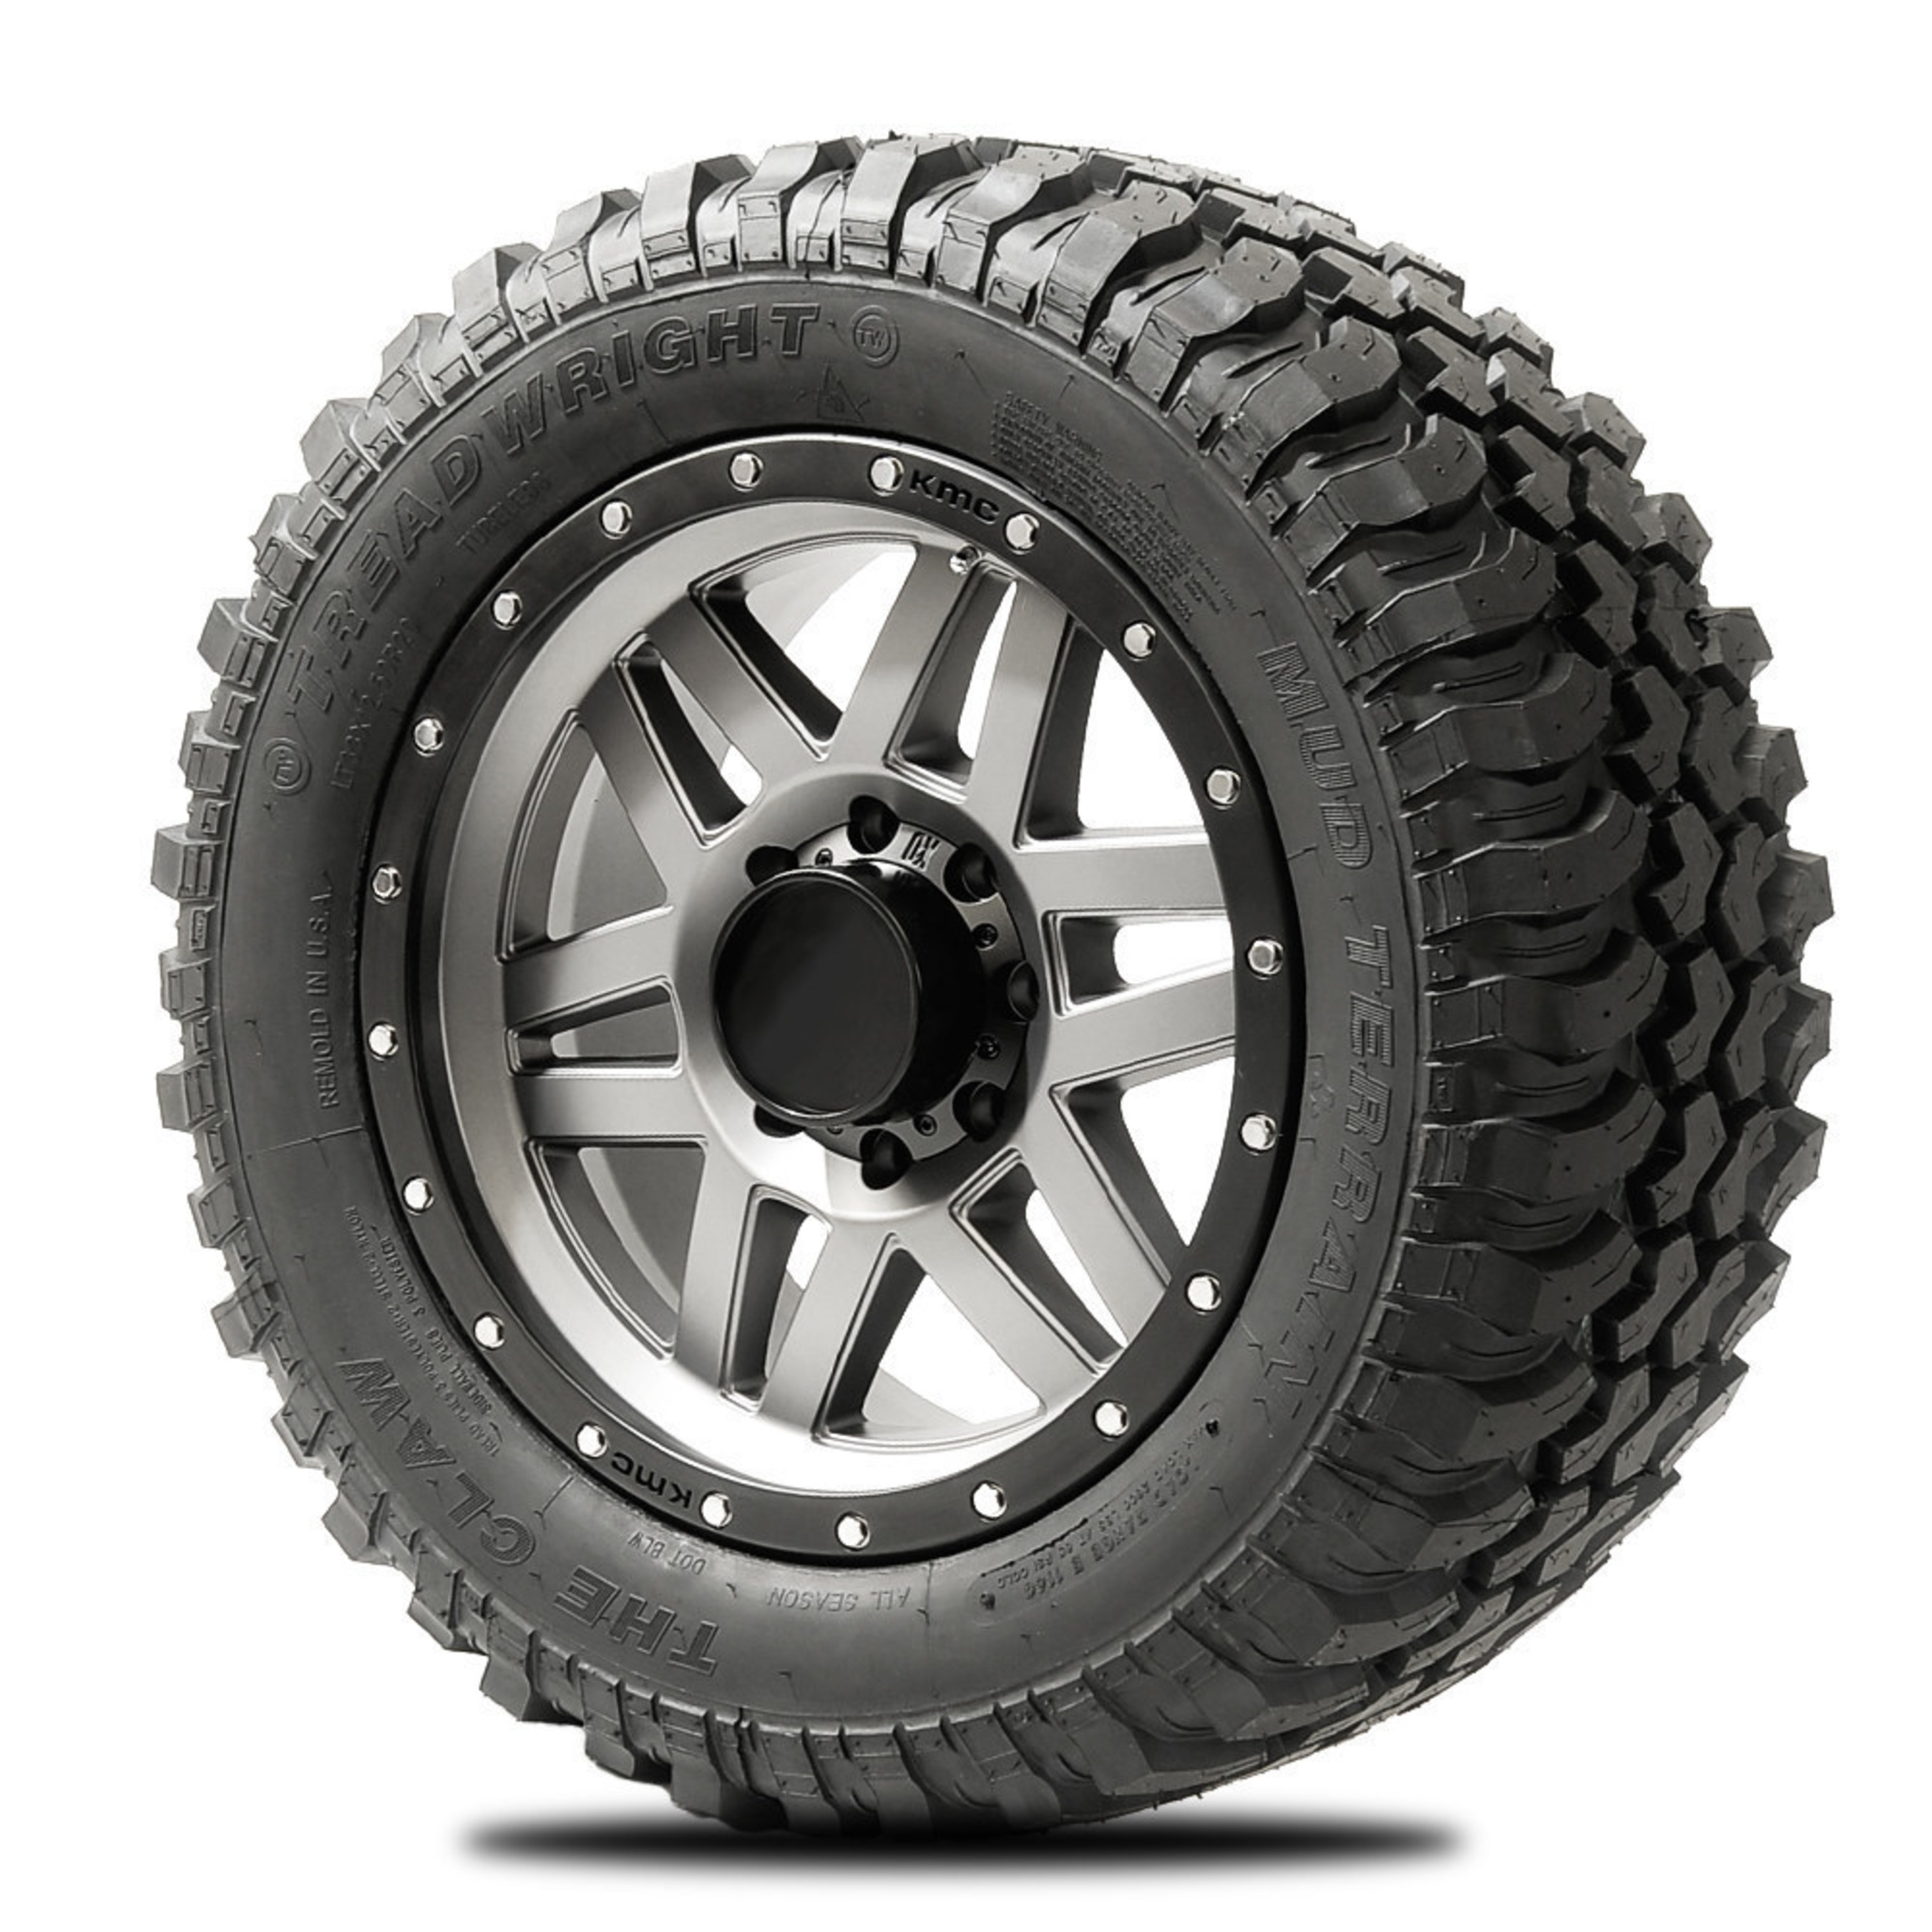 Treadwright Tires now fit any budget with Snap Financing